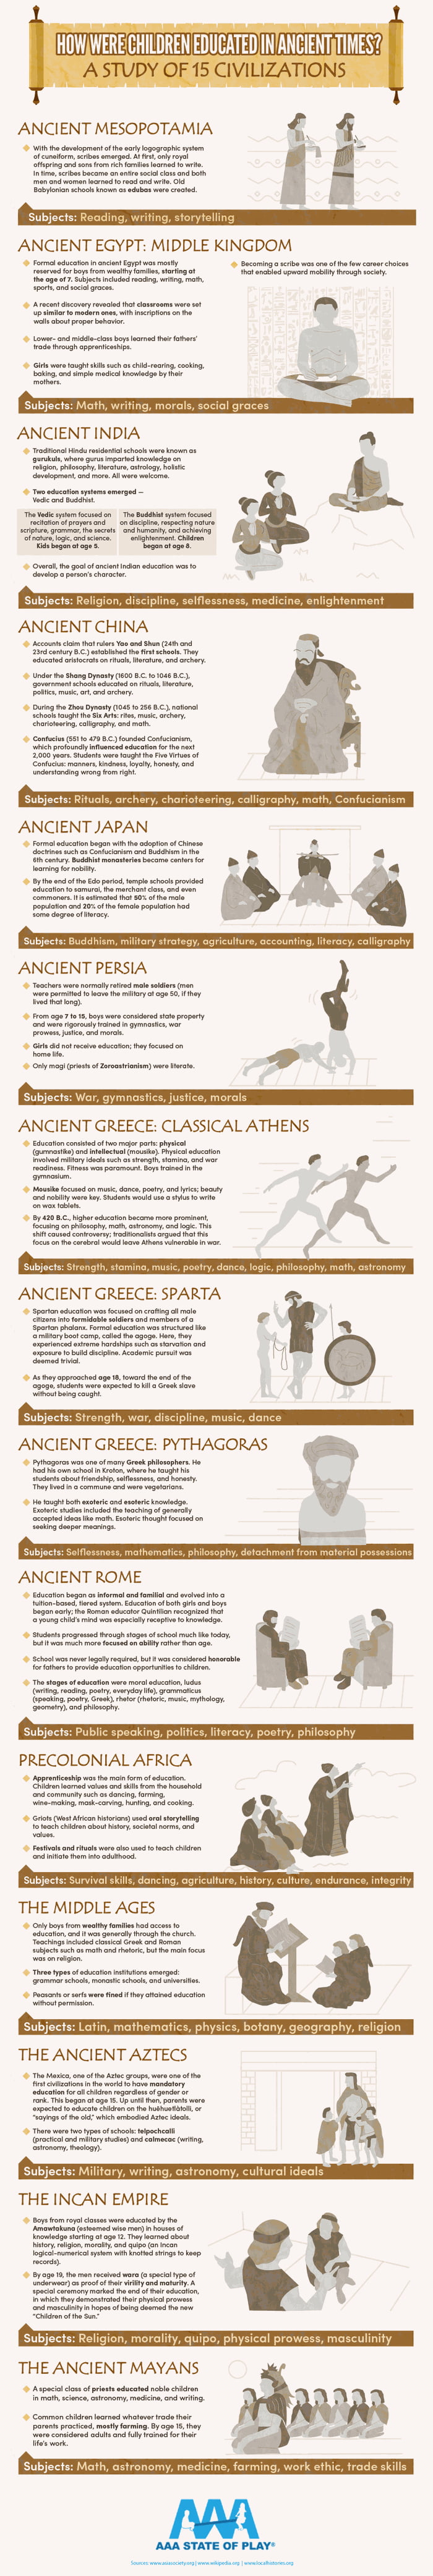 How children were educated in 15 ancient civilizations.